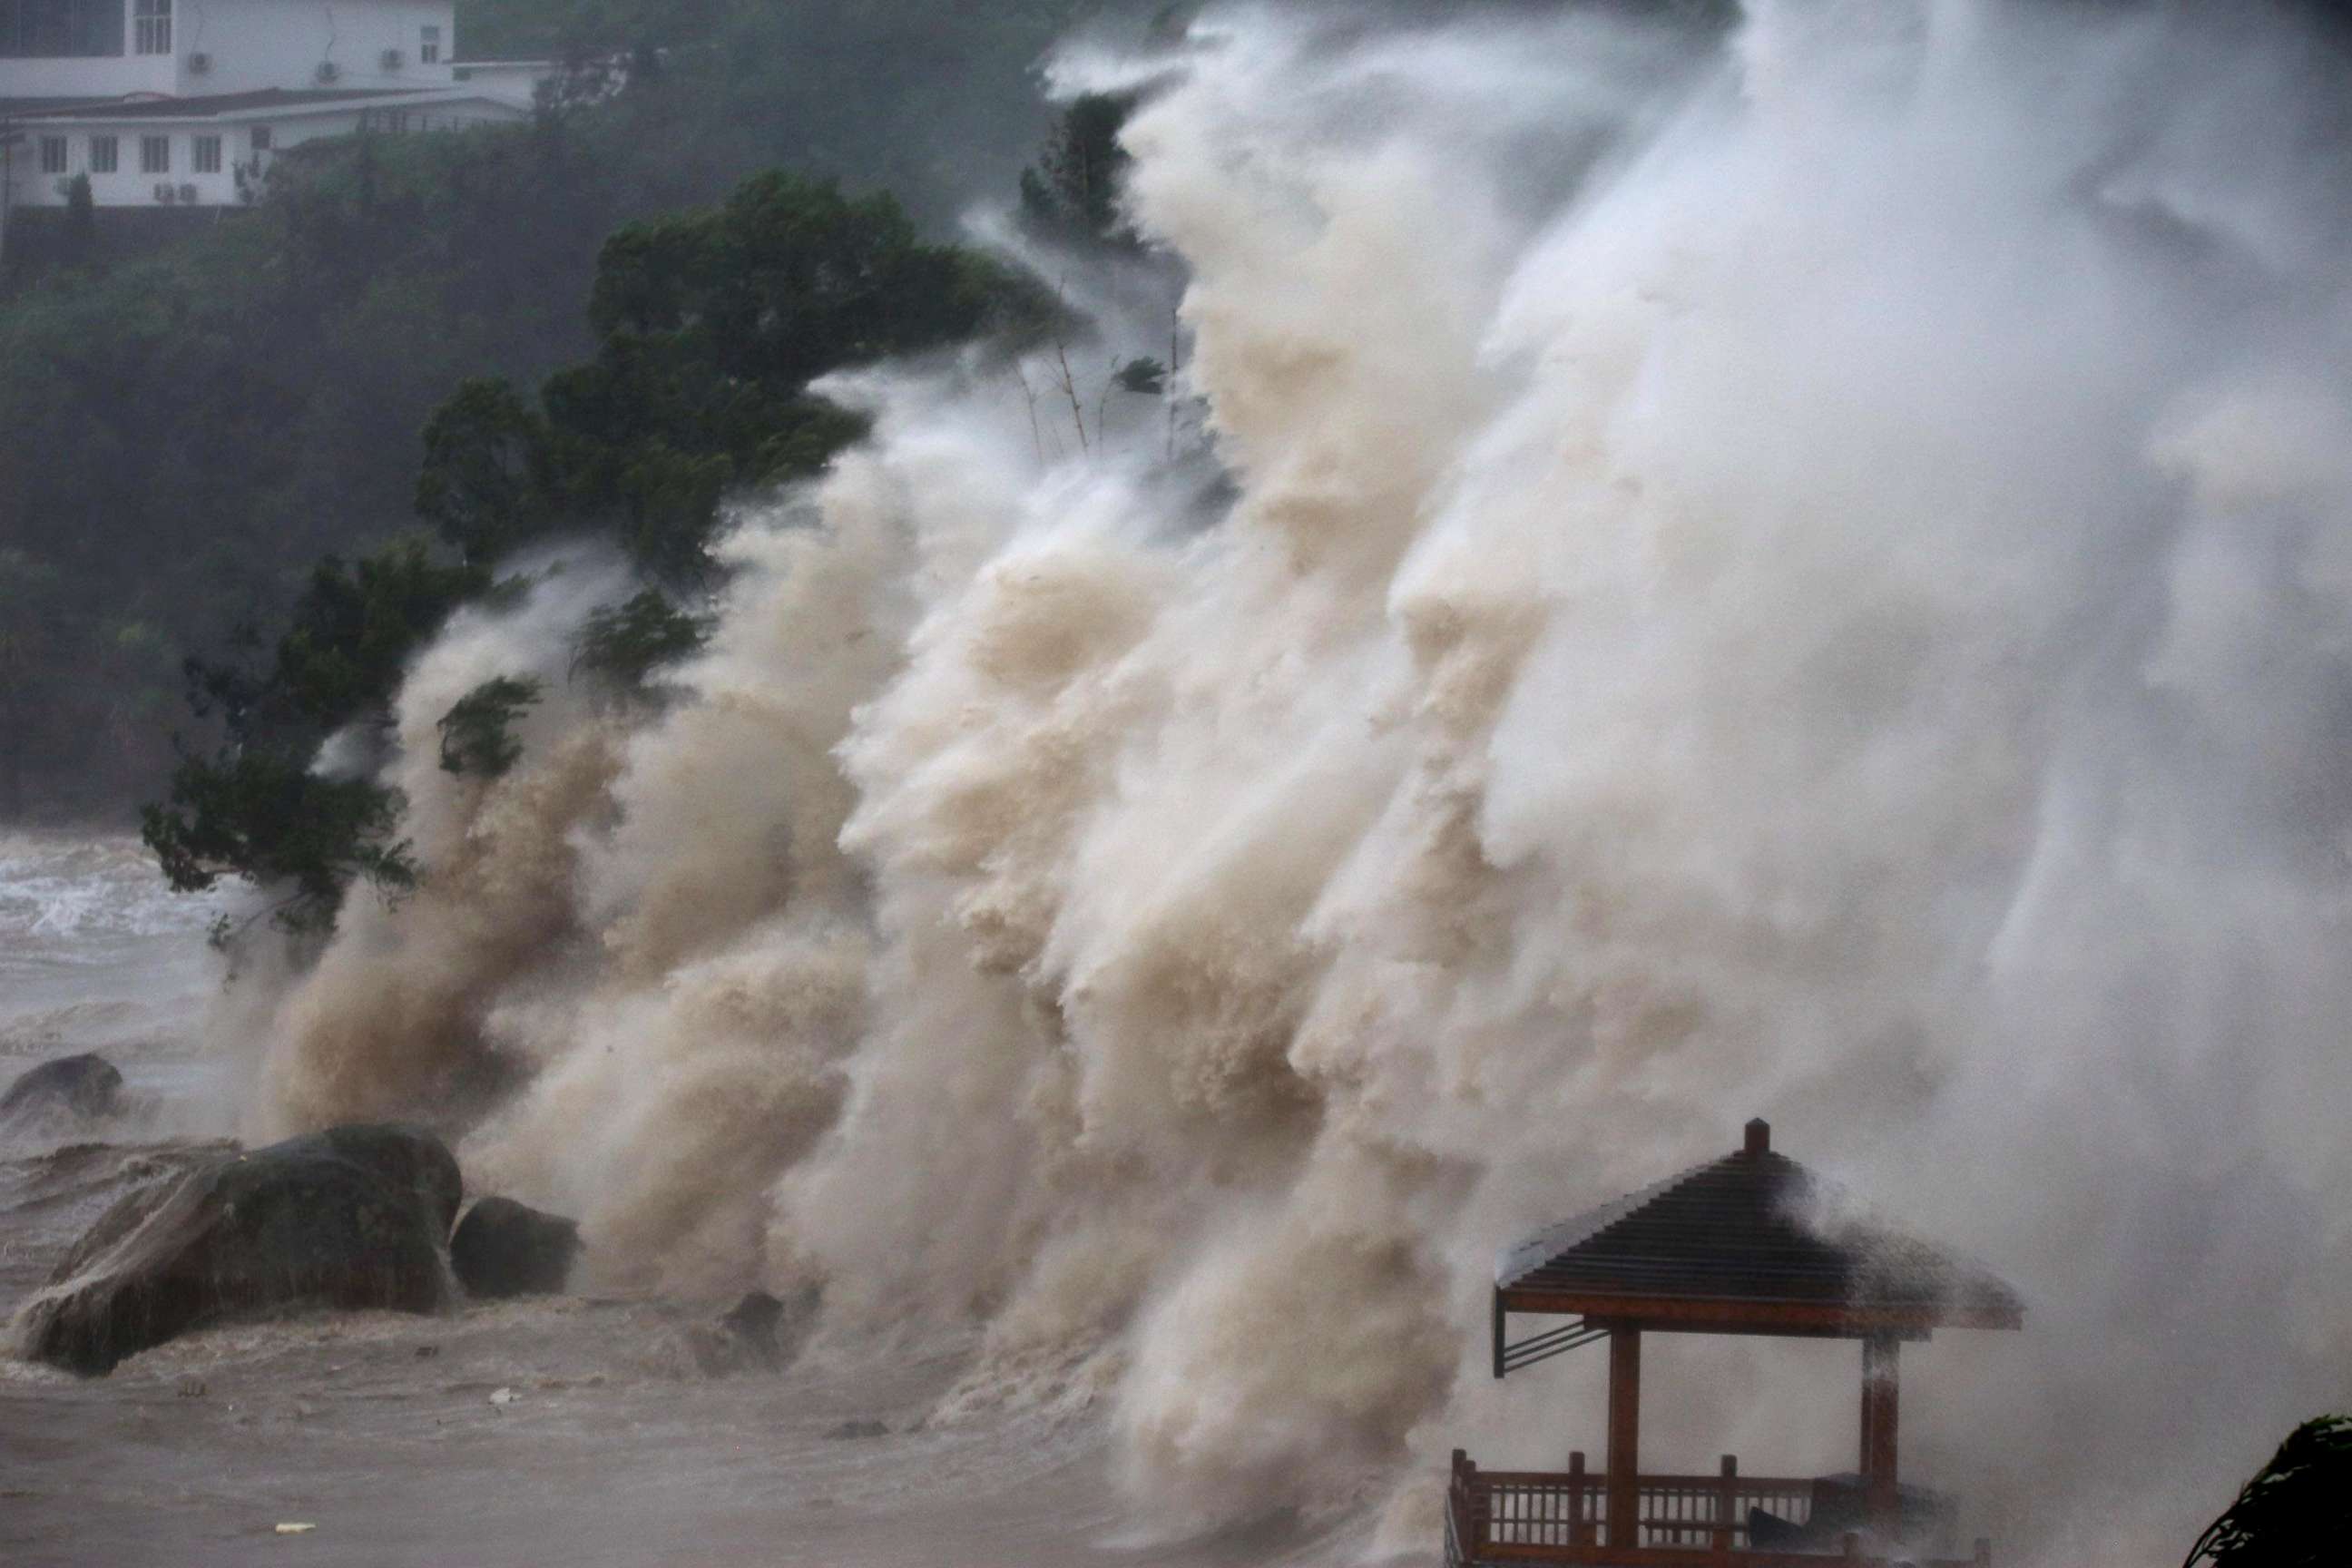 PHOTO: Waves brought by Typhoon Maria lash the shore in Wenzhou, Zhejiang province in China, July 11, 2018.